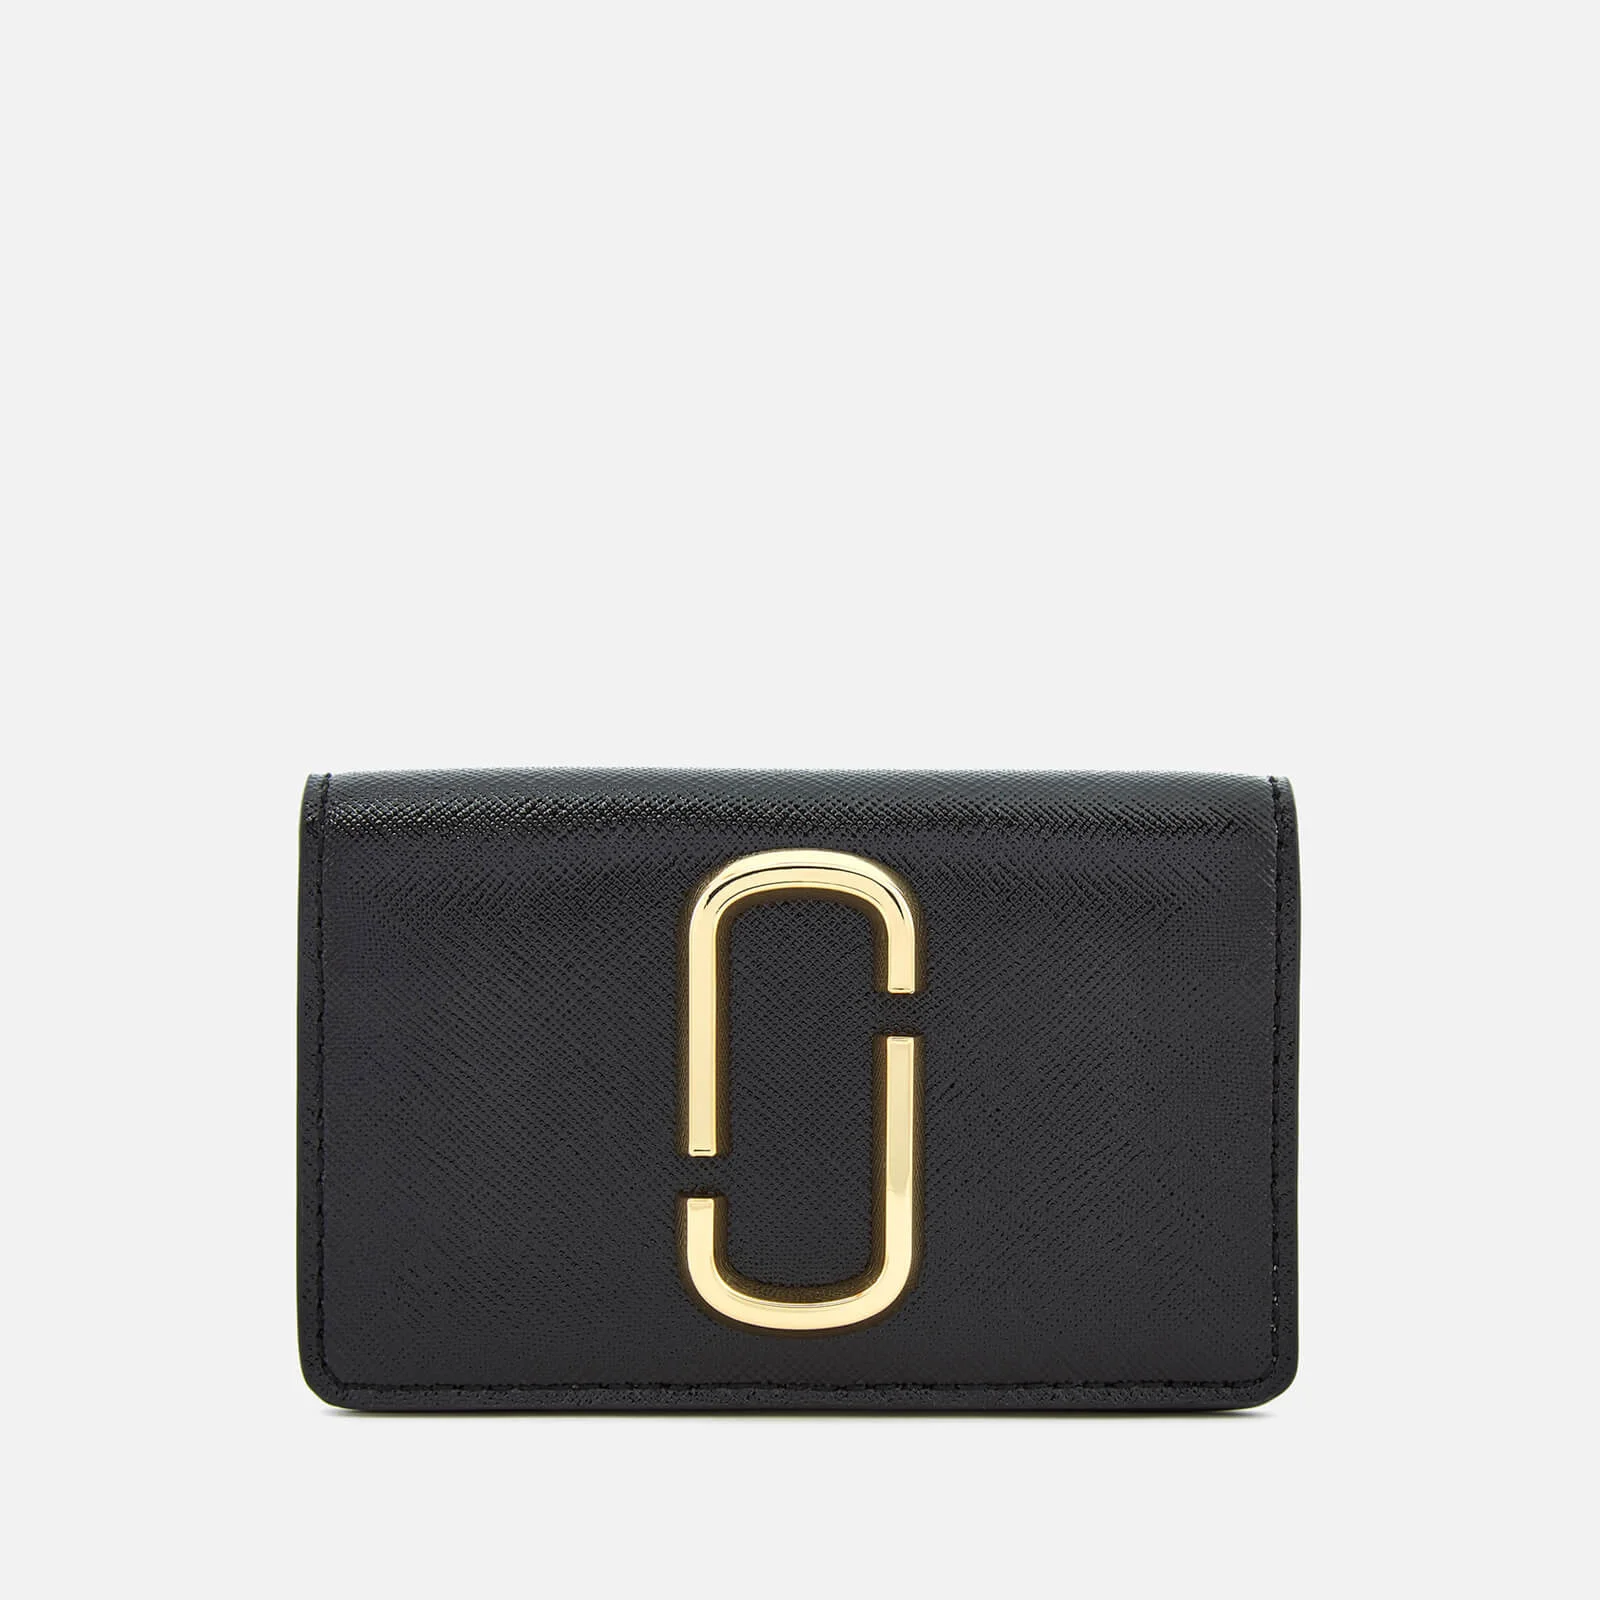 Marc Jacobs Women's Snapshot Business Card Case - Black/Baby Pink Image 1